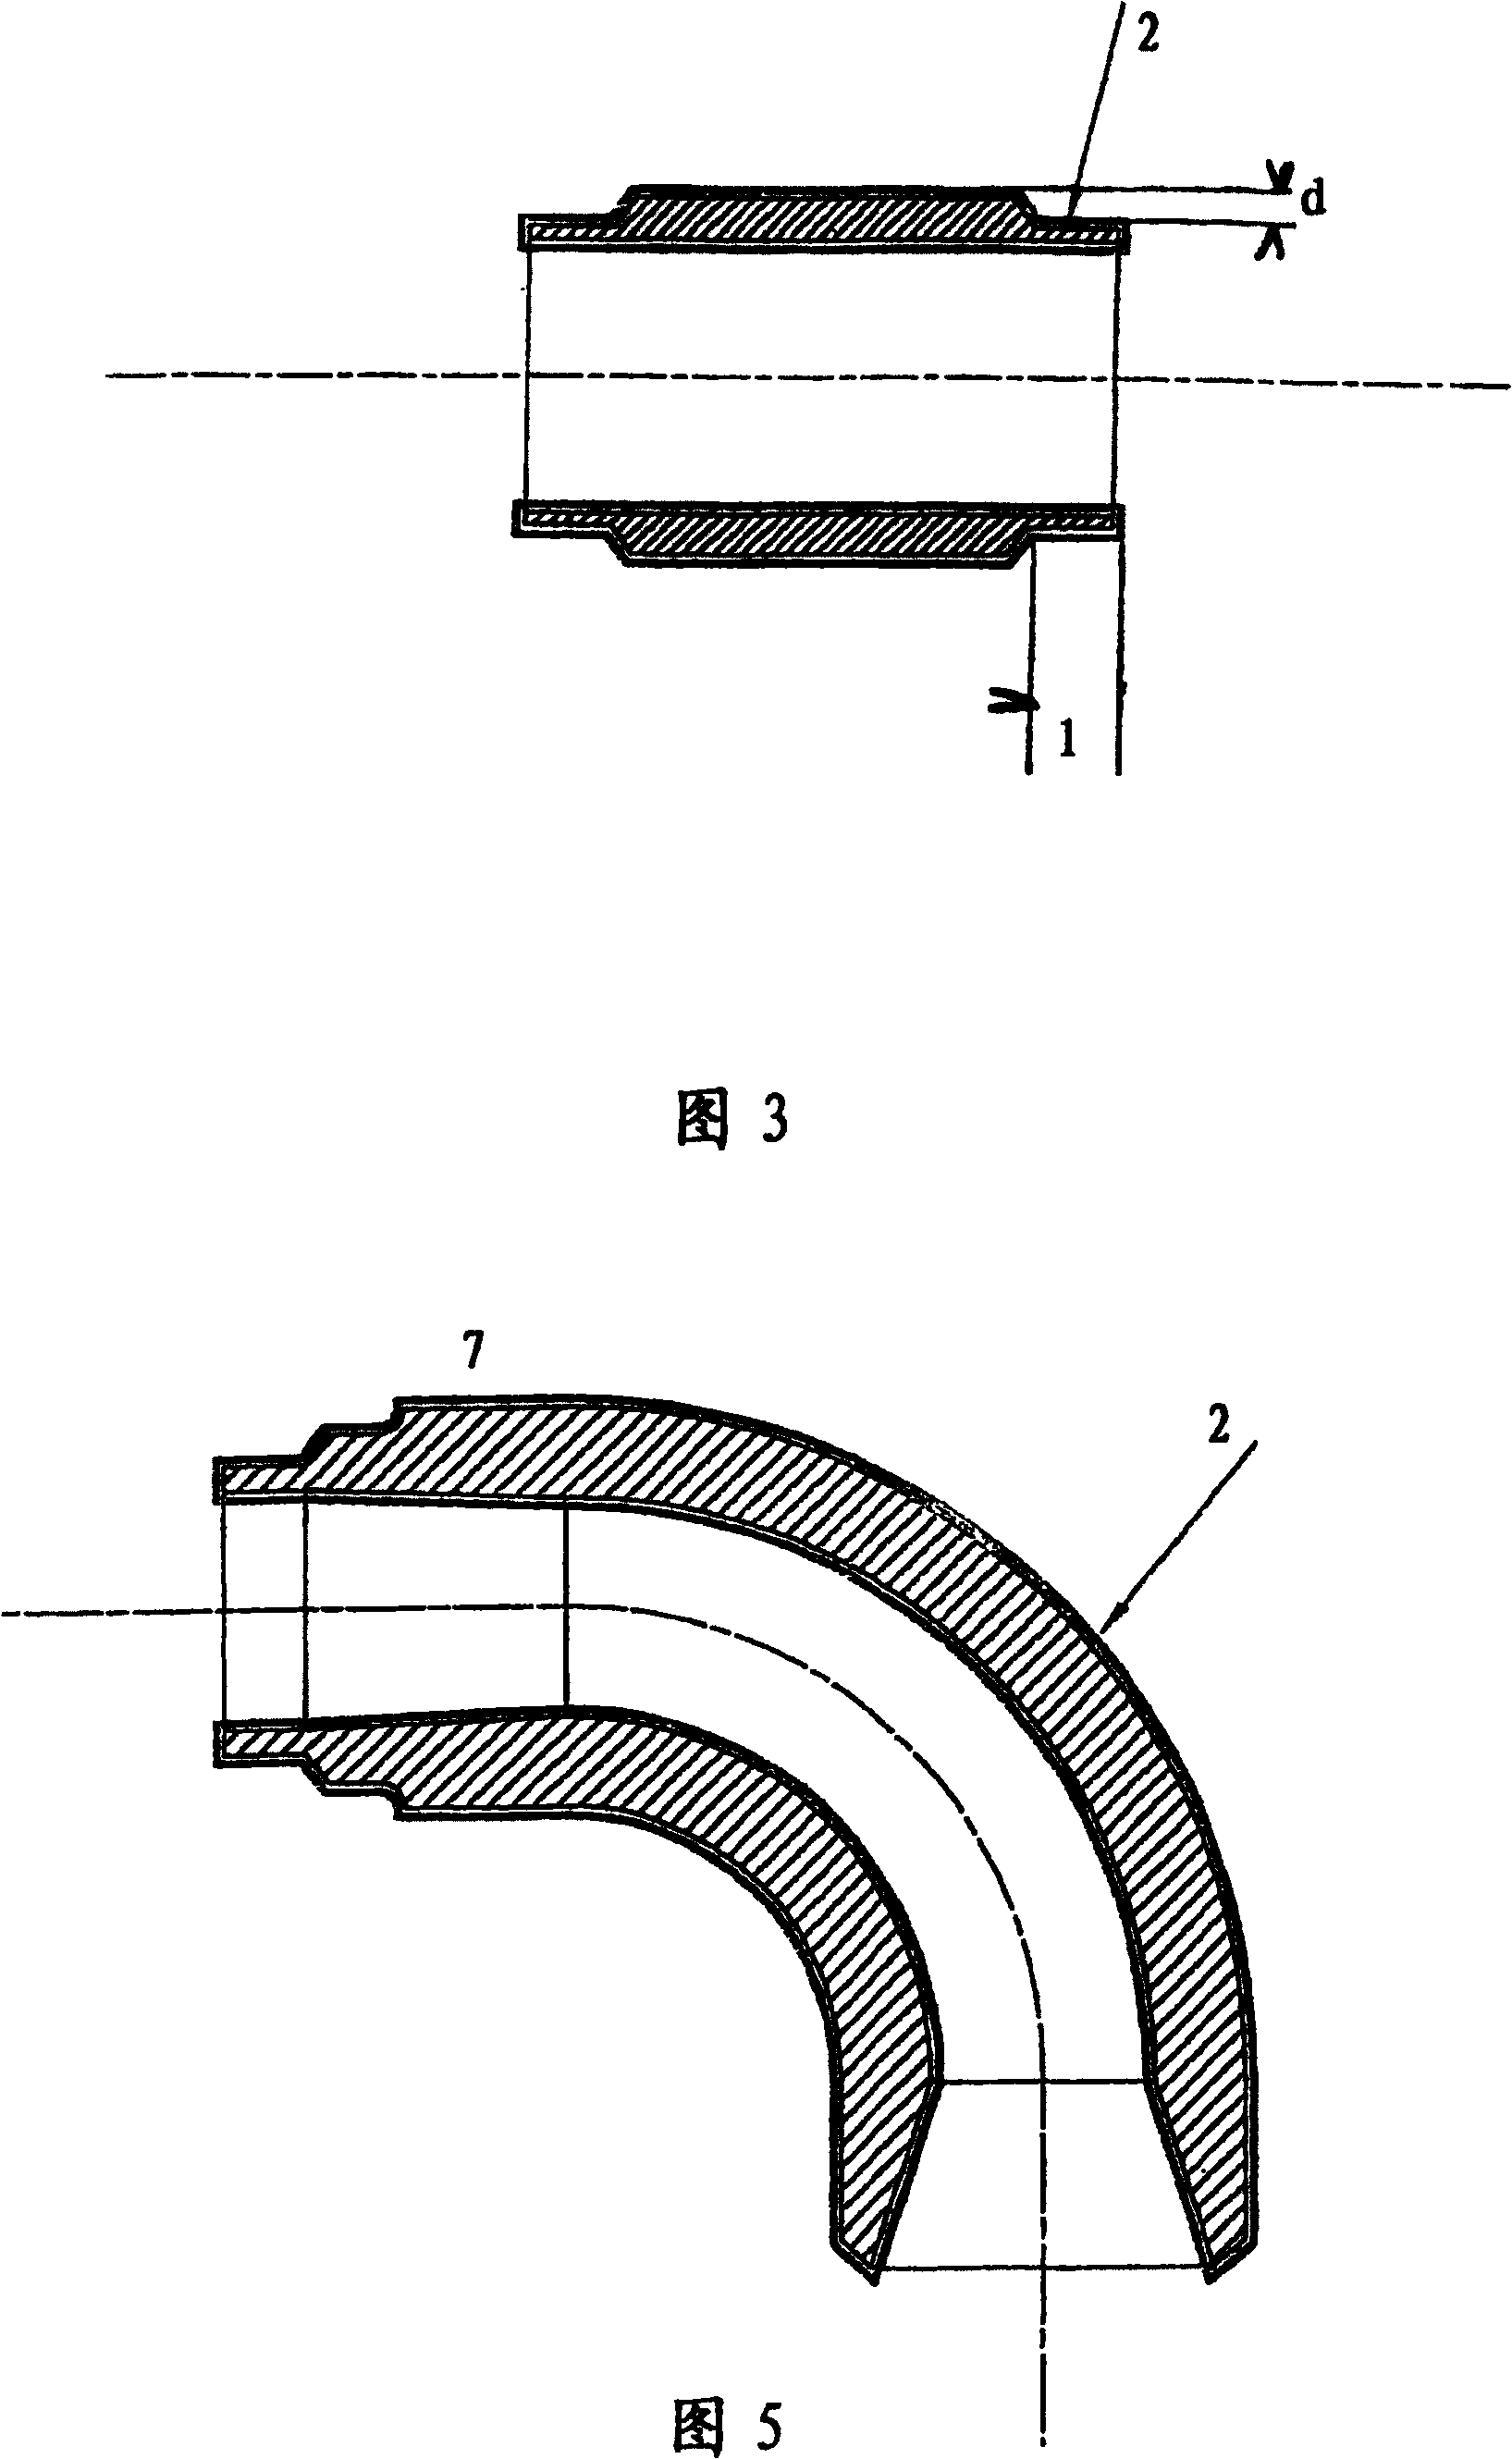 Method of protecting equipment against corrosion at high temperature